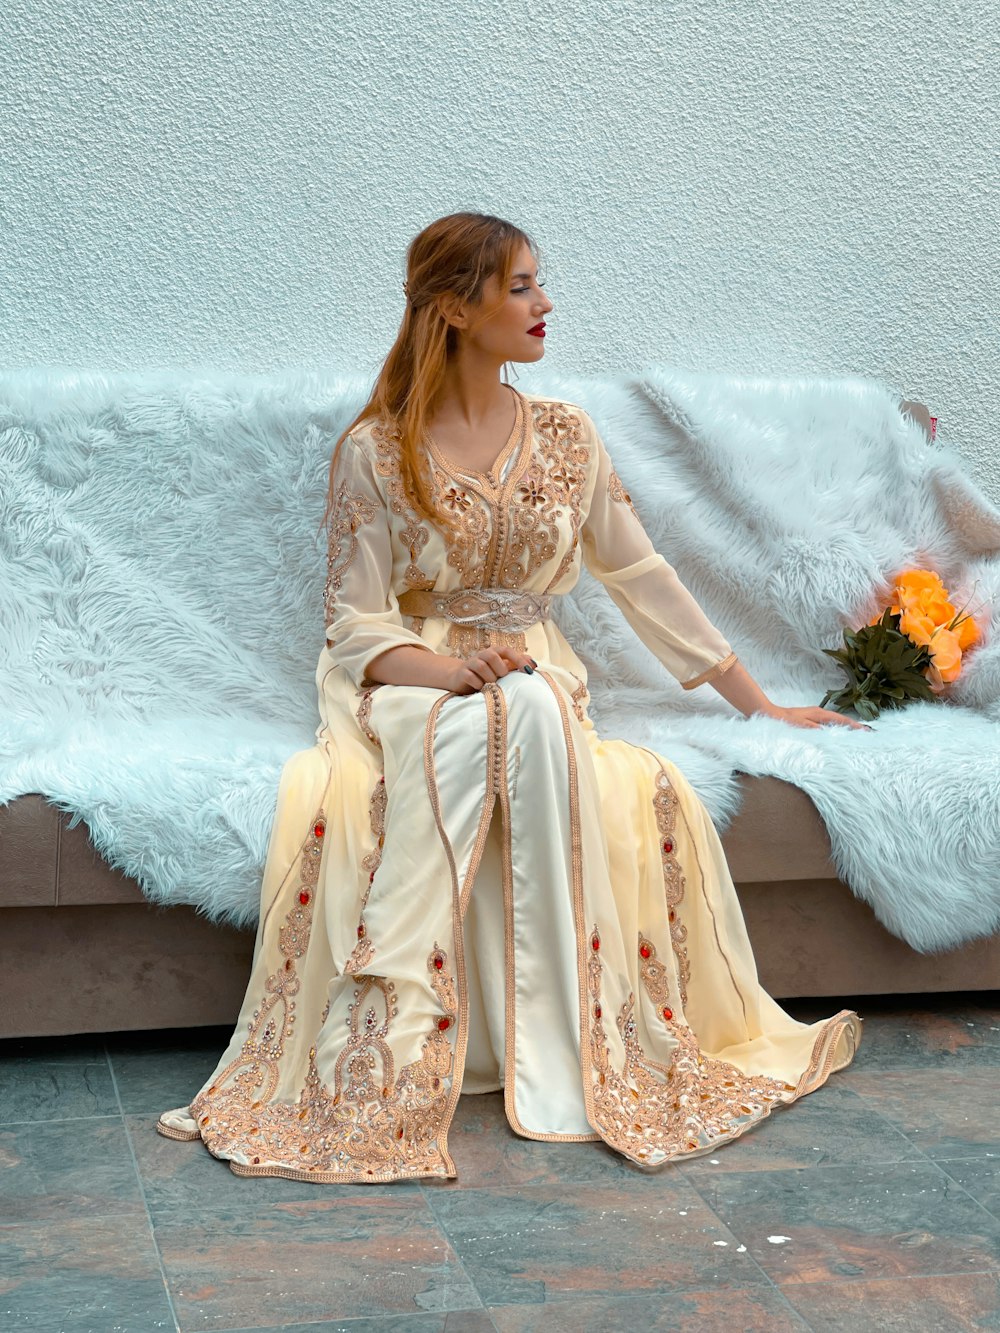 a woman sitting on a couch wearing a long dress